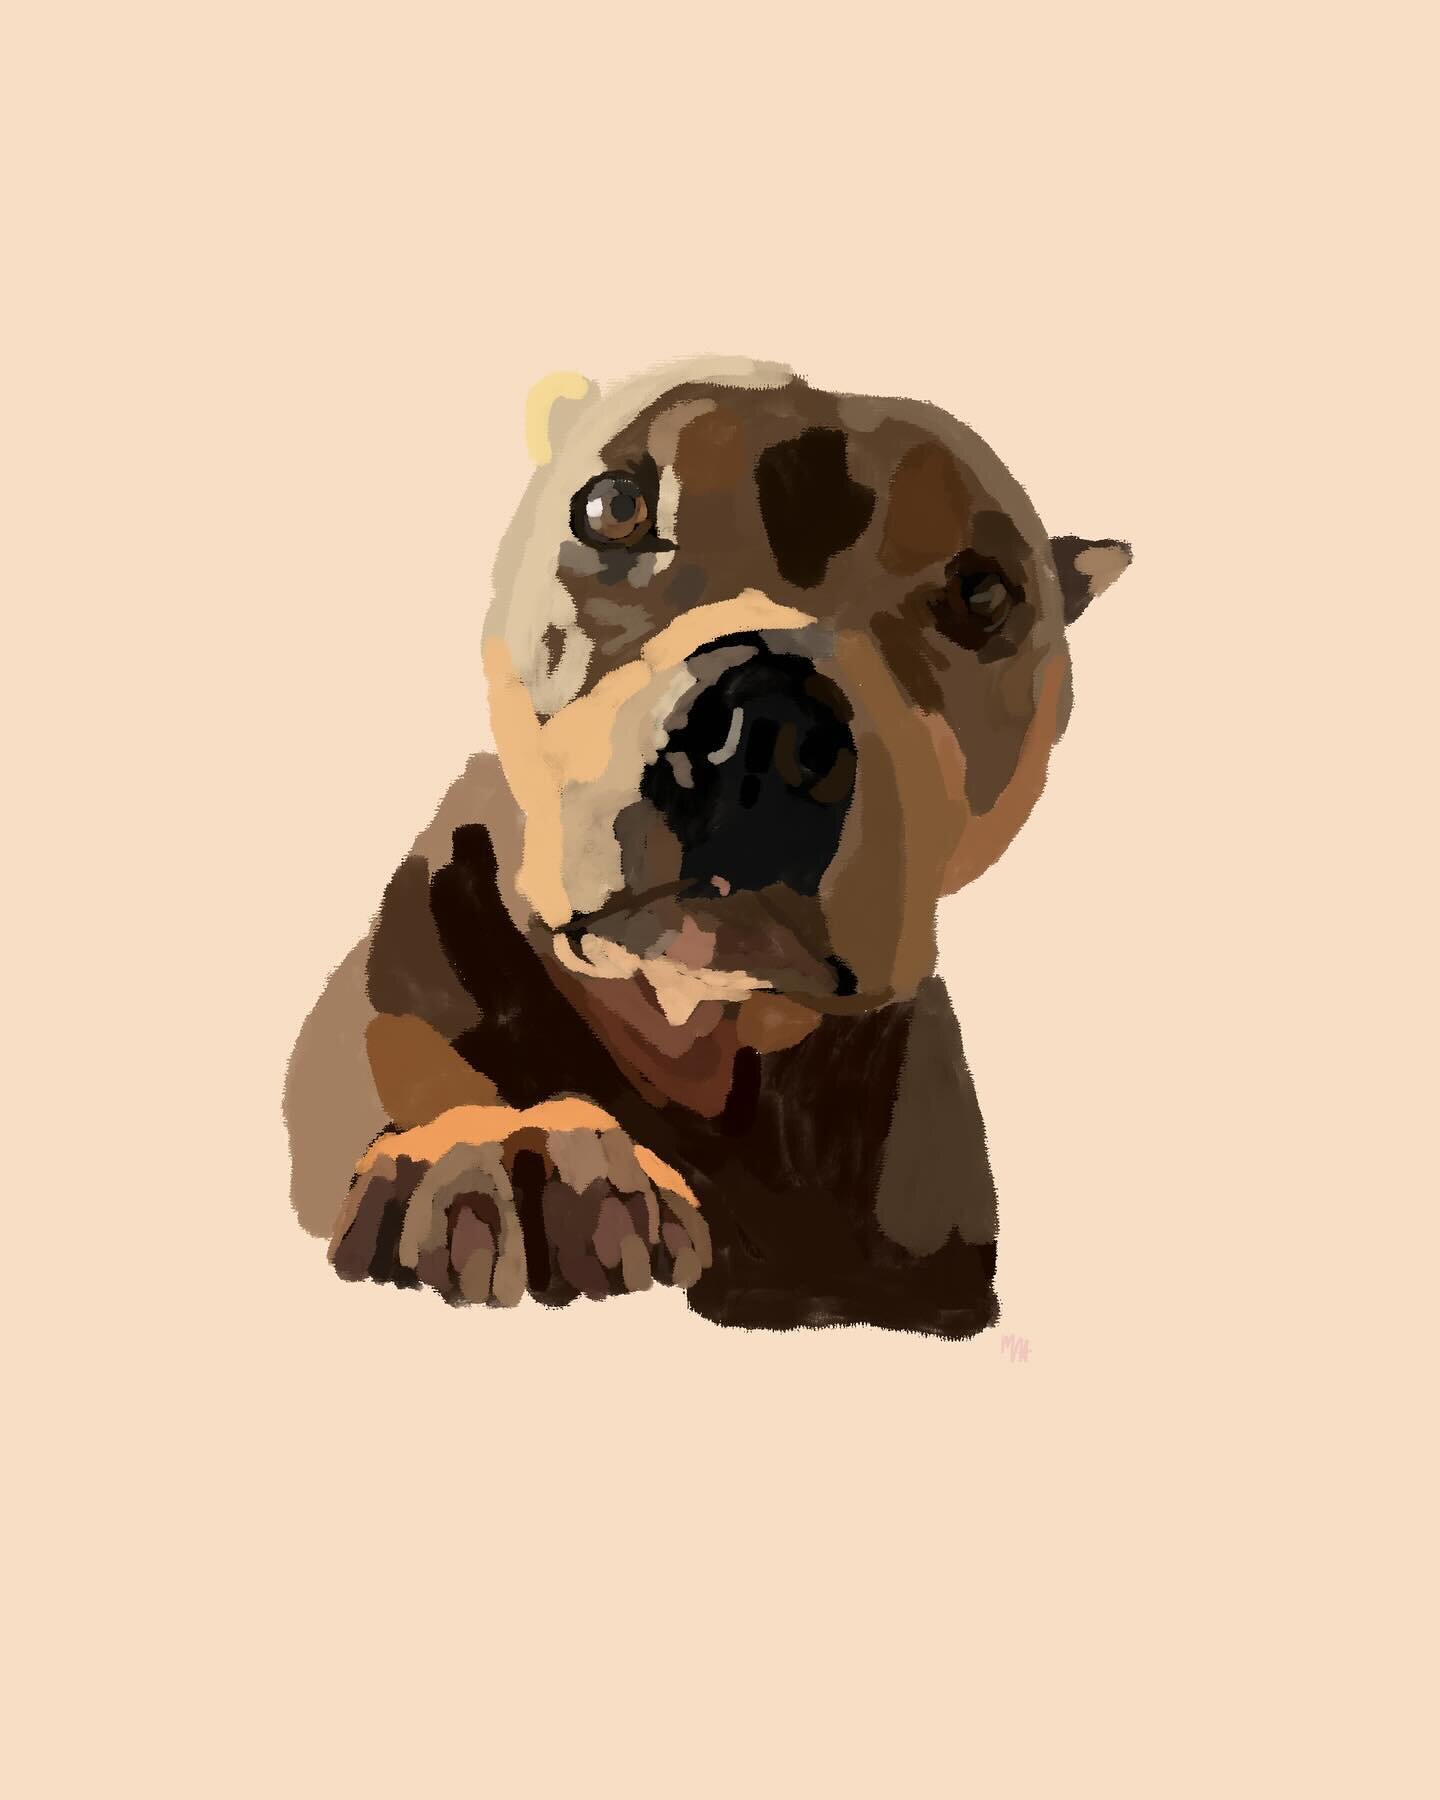 Miss peaches - queen of the rescues 

Come on! Look at that face. Raising money and awareness for all the babies waiting to find their forever houses. 

#illustrationartist #illustratragram #graphicdesign #illustration_daily #illustratorsofinstagram 